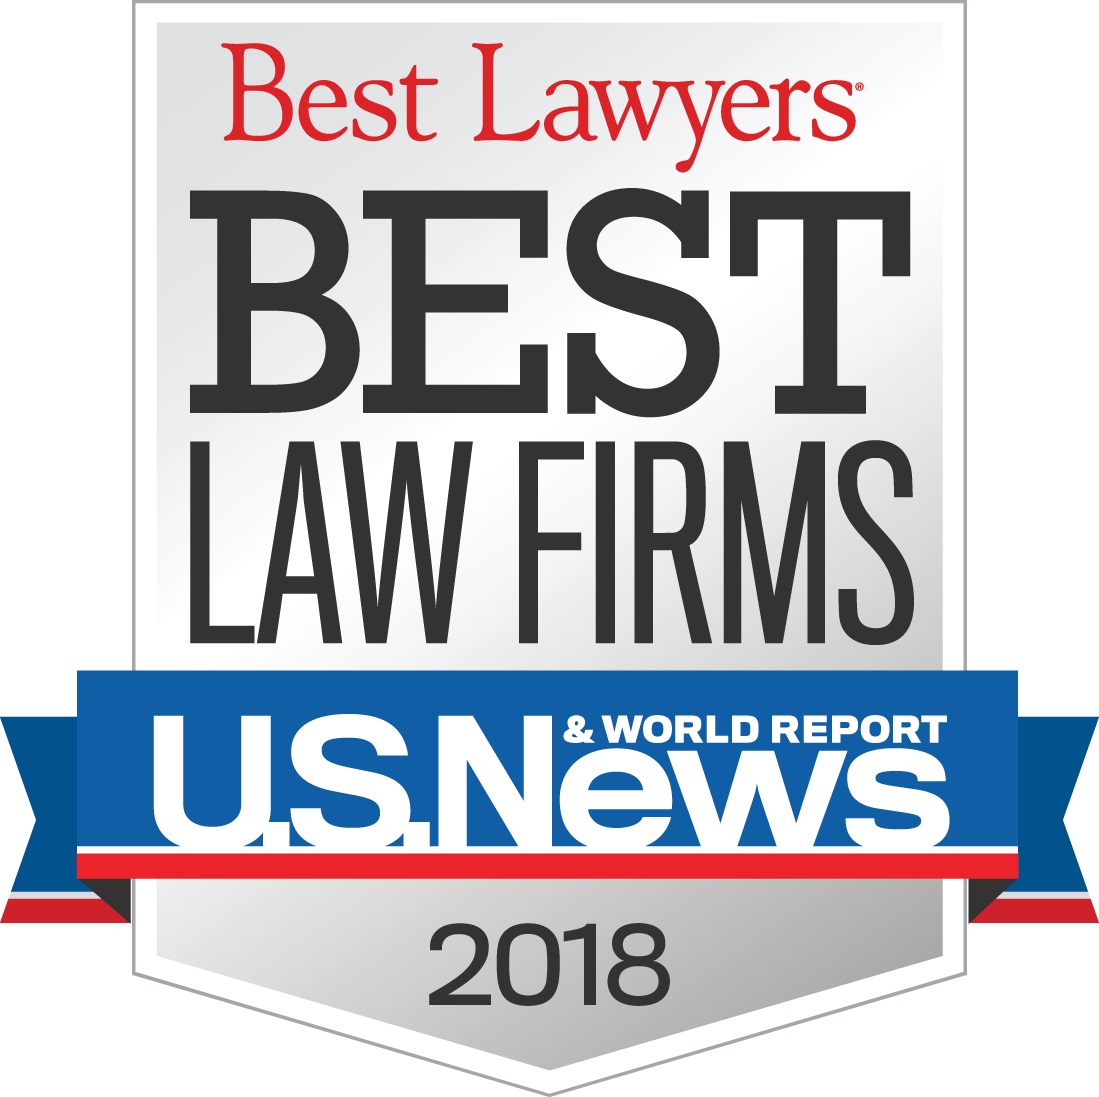 Best Lawyers 2018 Listed - US News